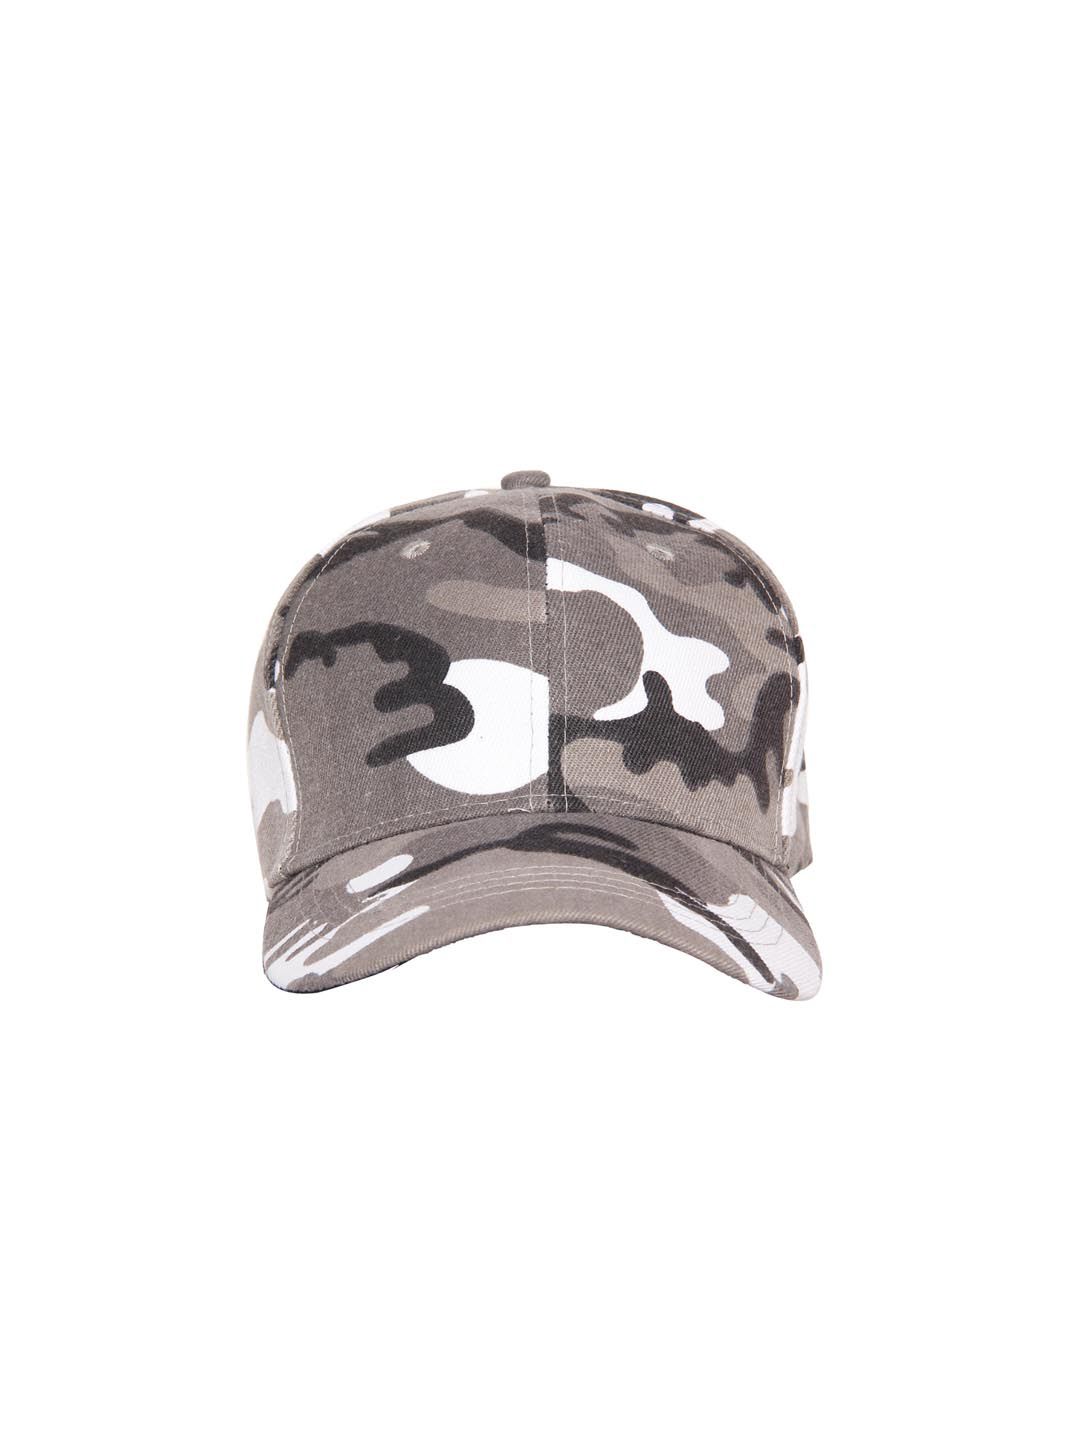 FabSeasons Unisex Camouflage Printed Baseball Cap Price in India